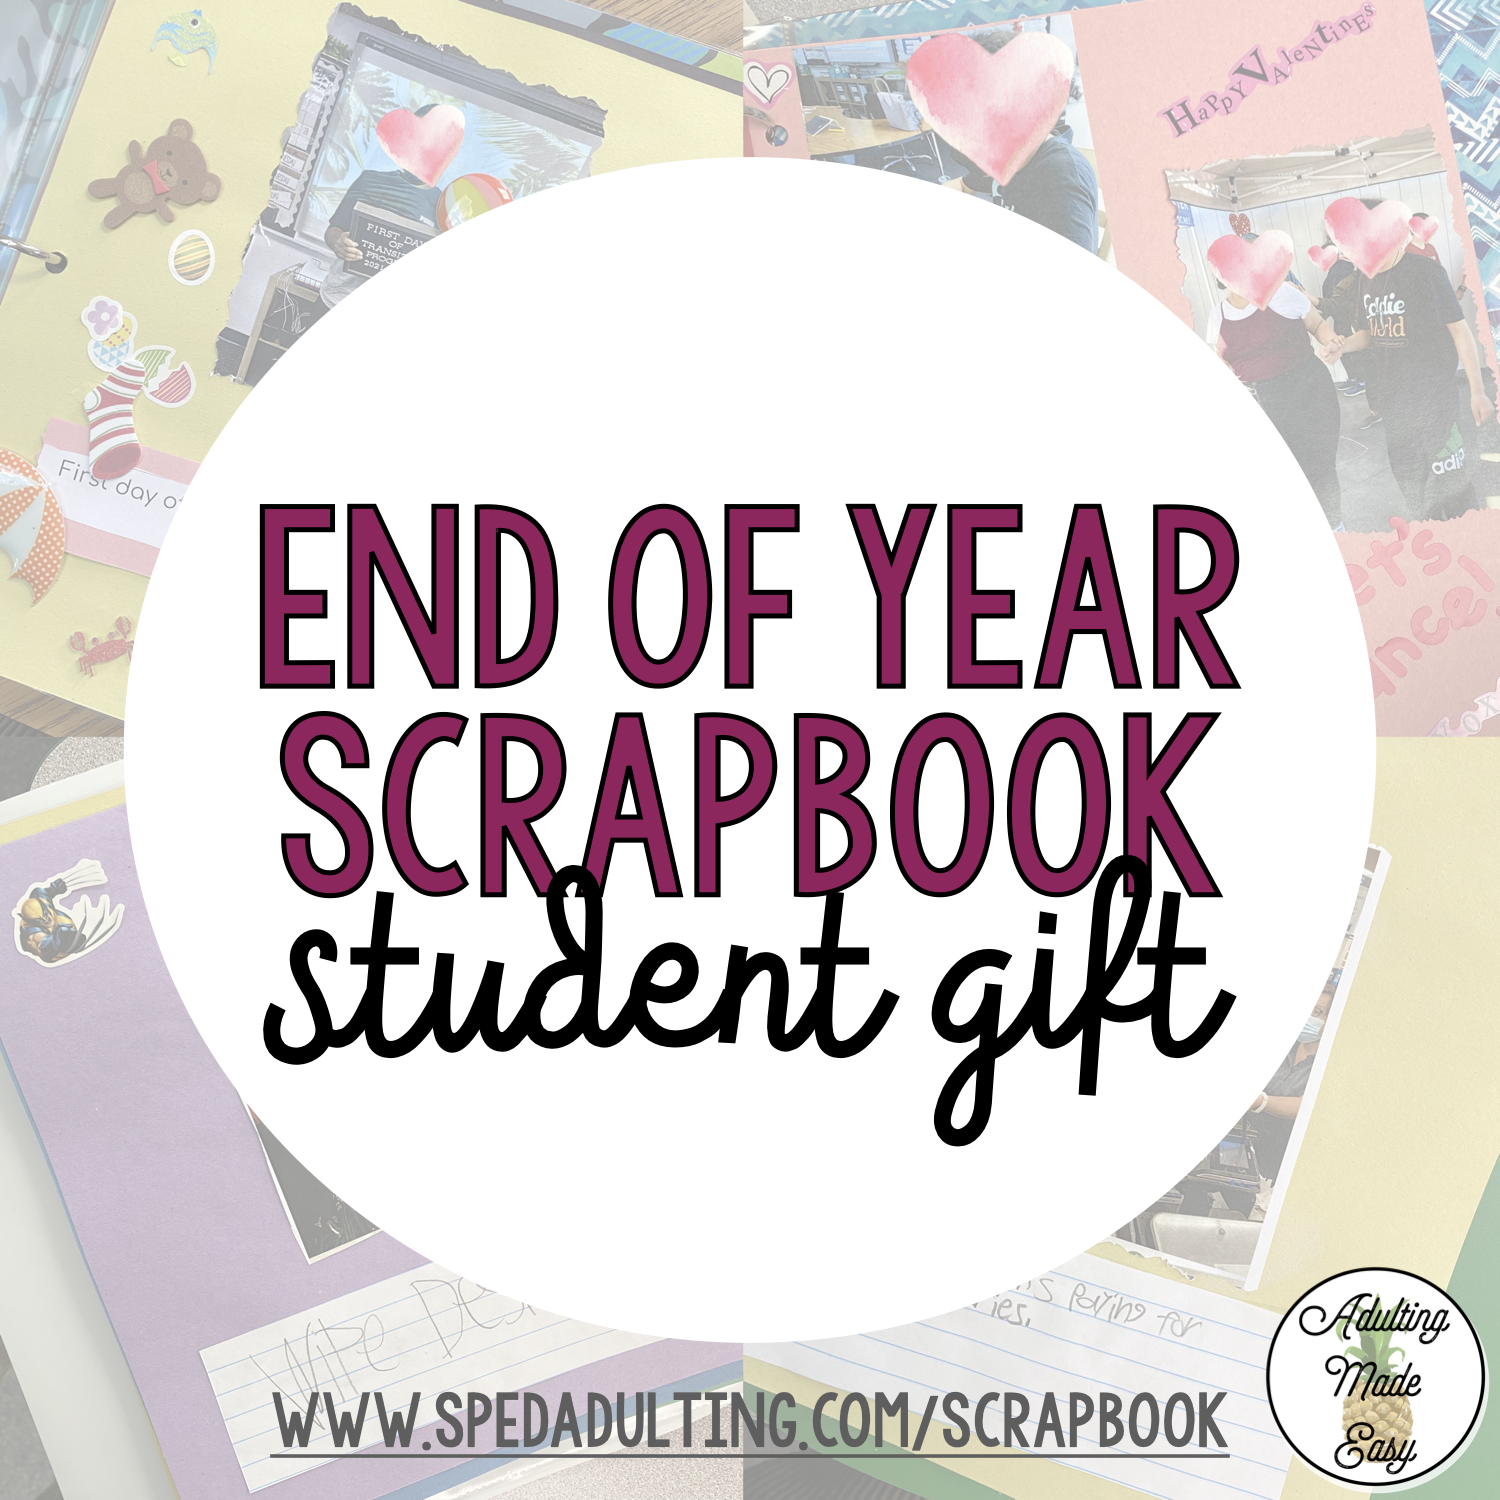 End of Year Scrapbook Student Gift